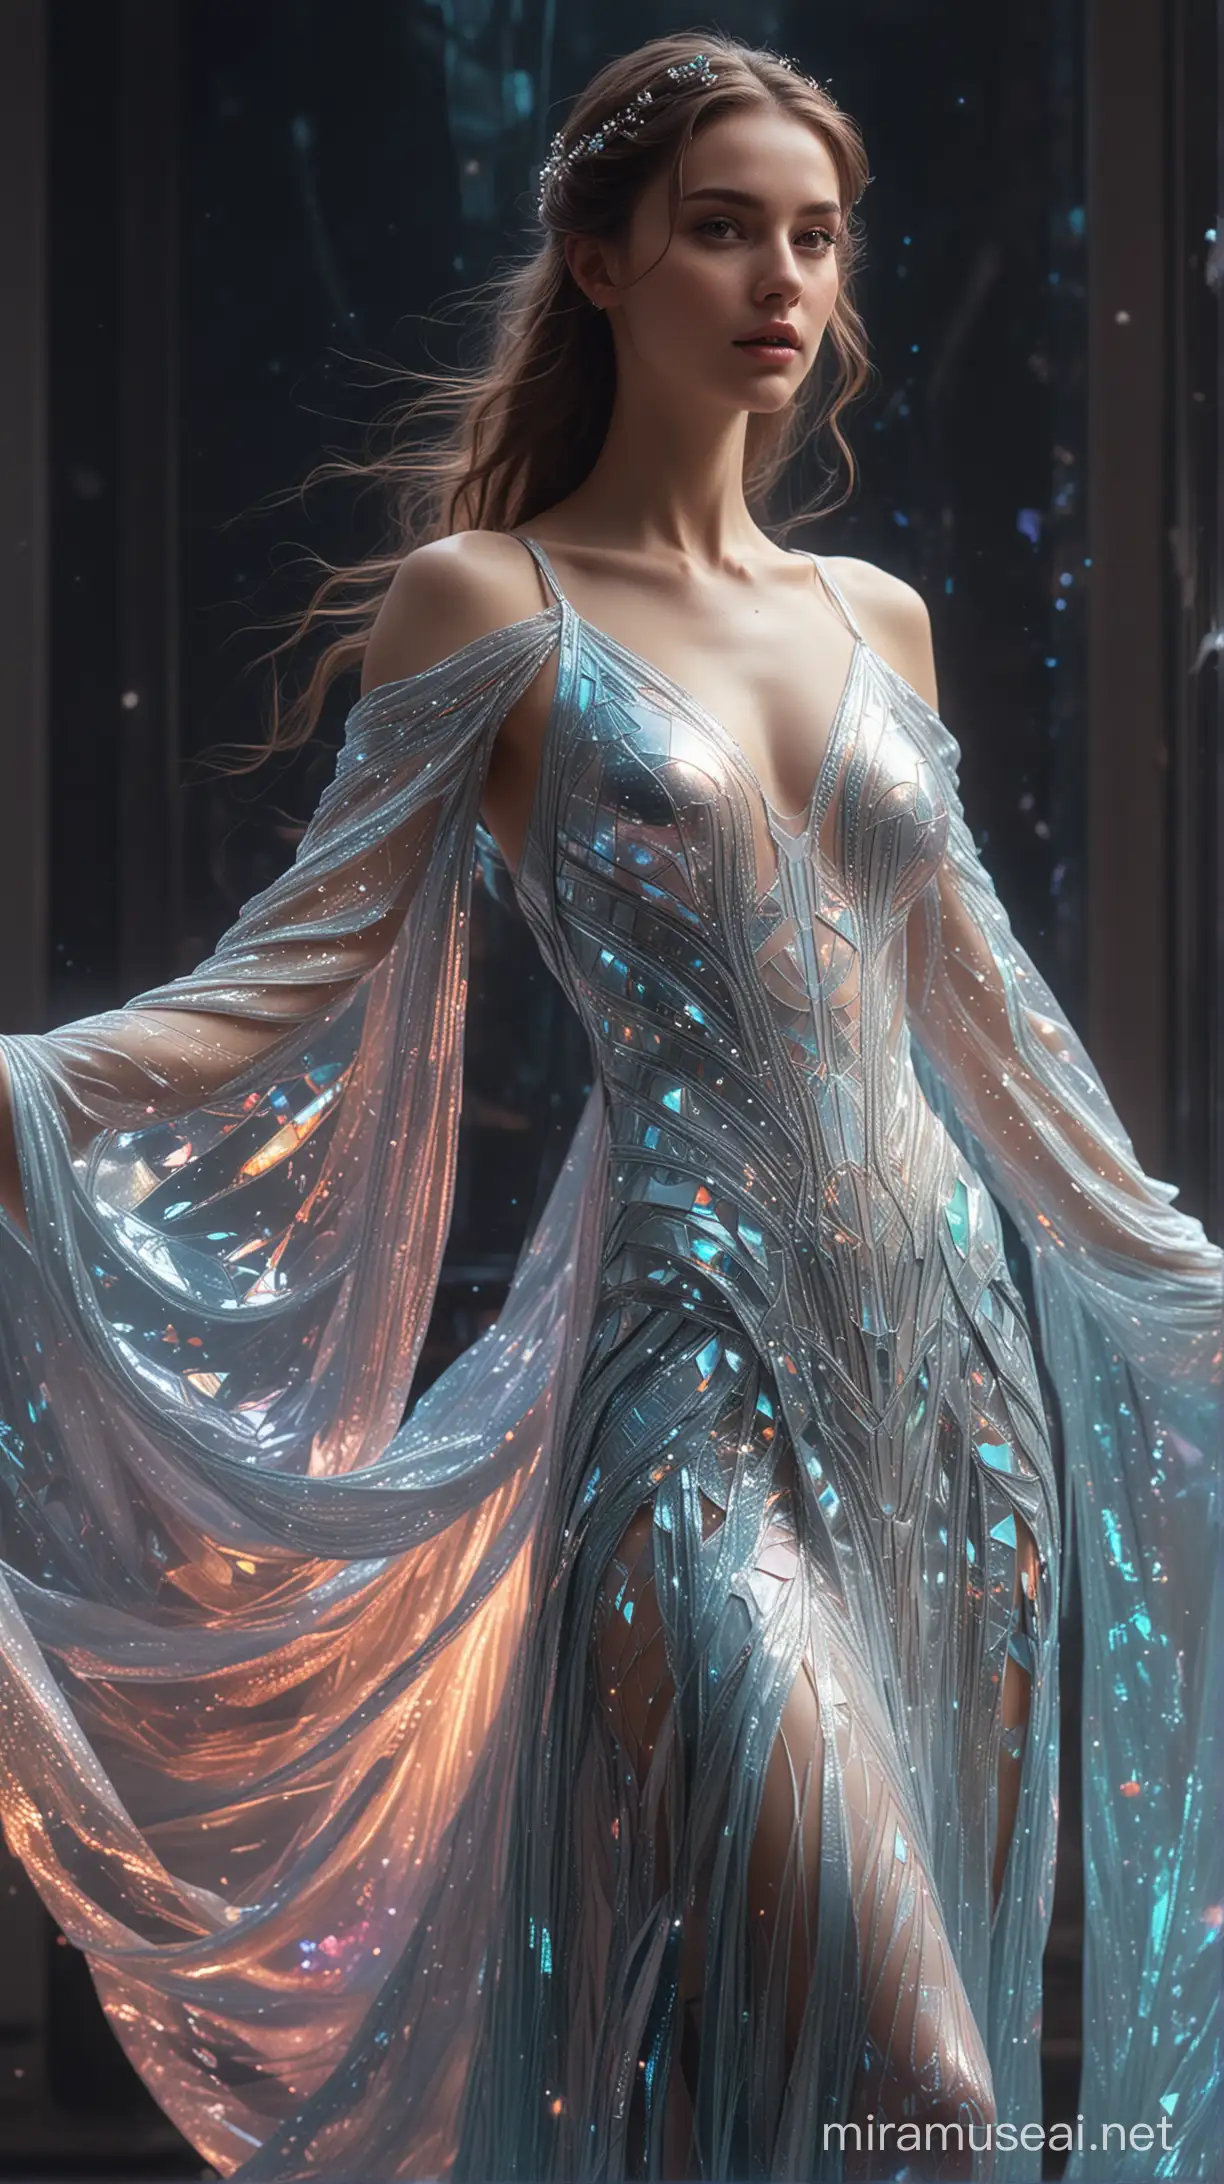 Ethereal Holographic Gown Futuristic Digital Painting of Translucent Beauty